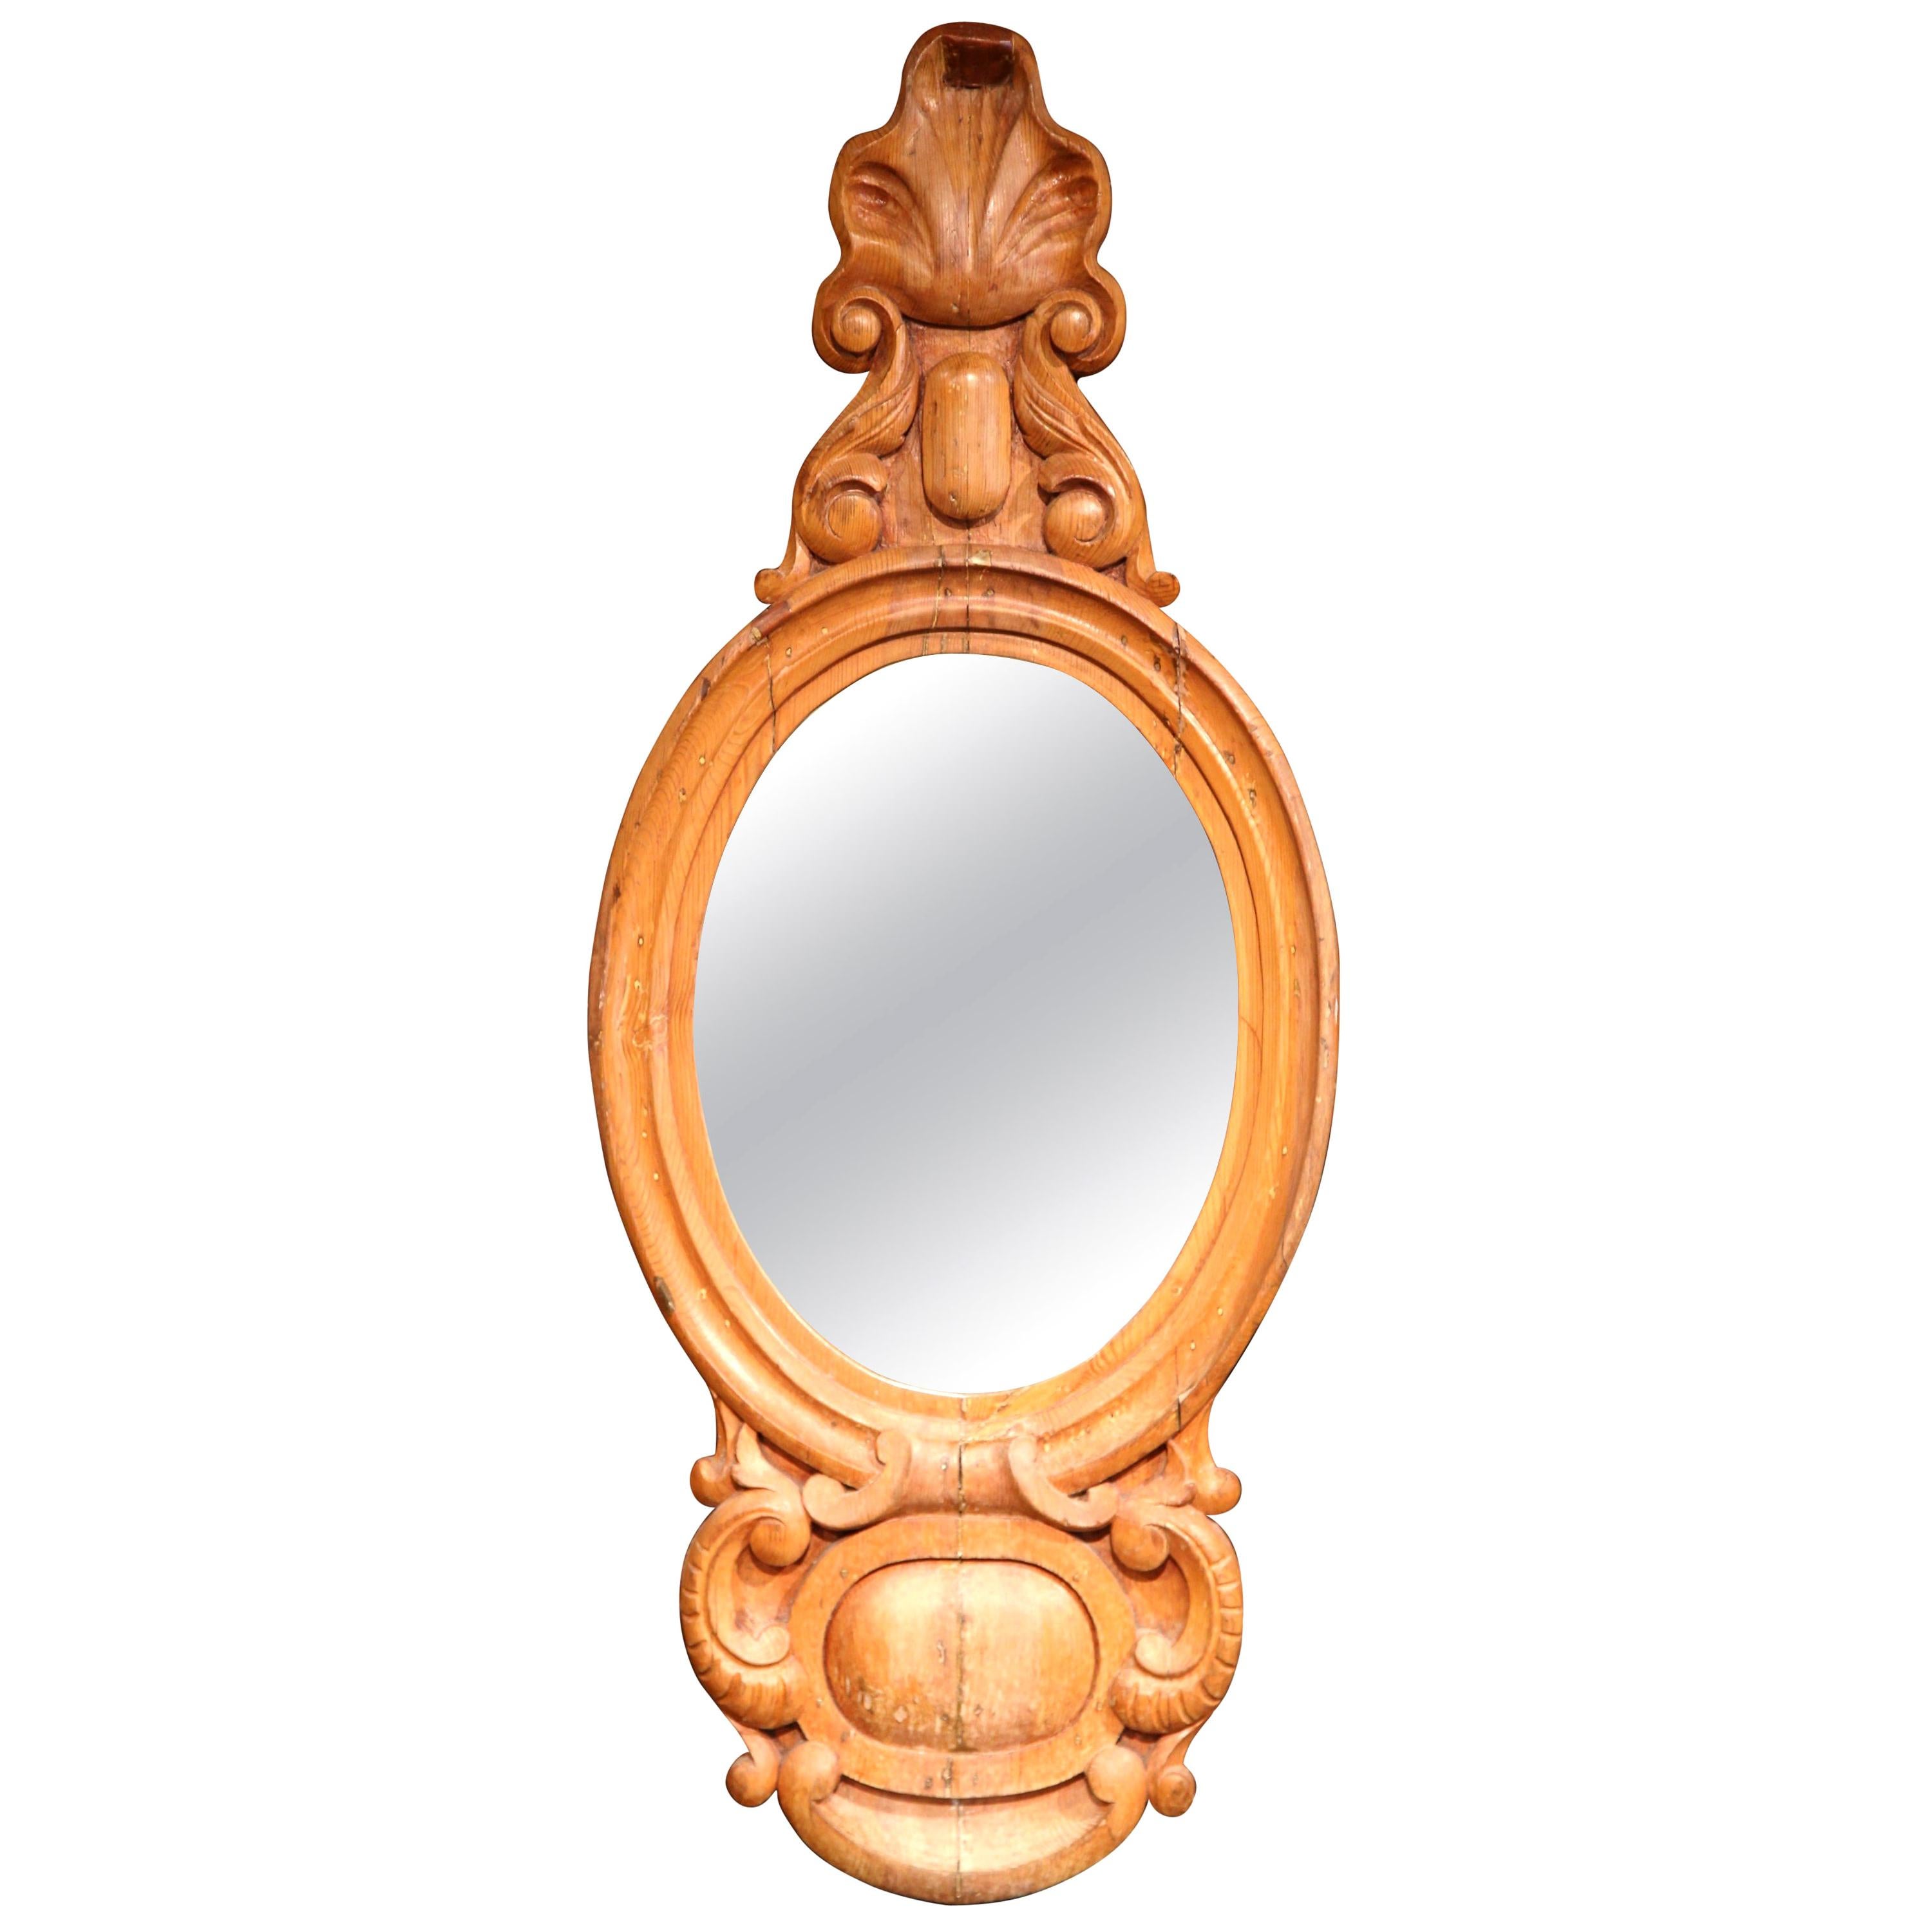 19th Century English Carved Pine Oval Wall Mirror with Shell Motif